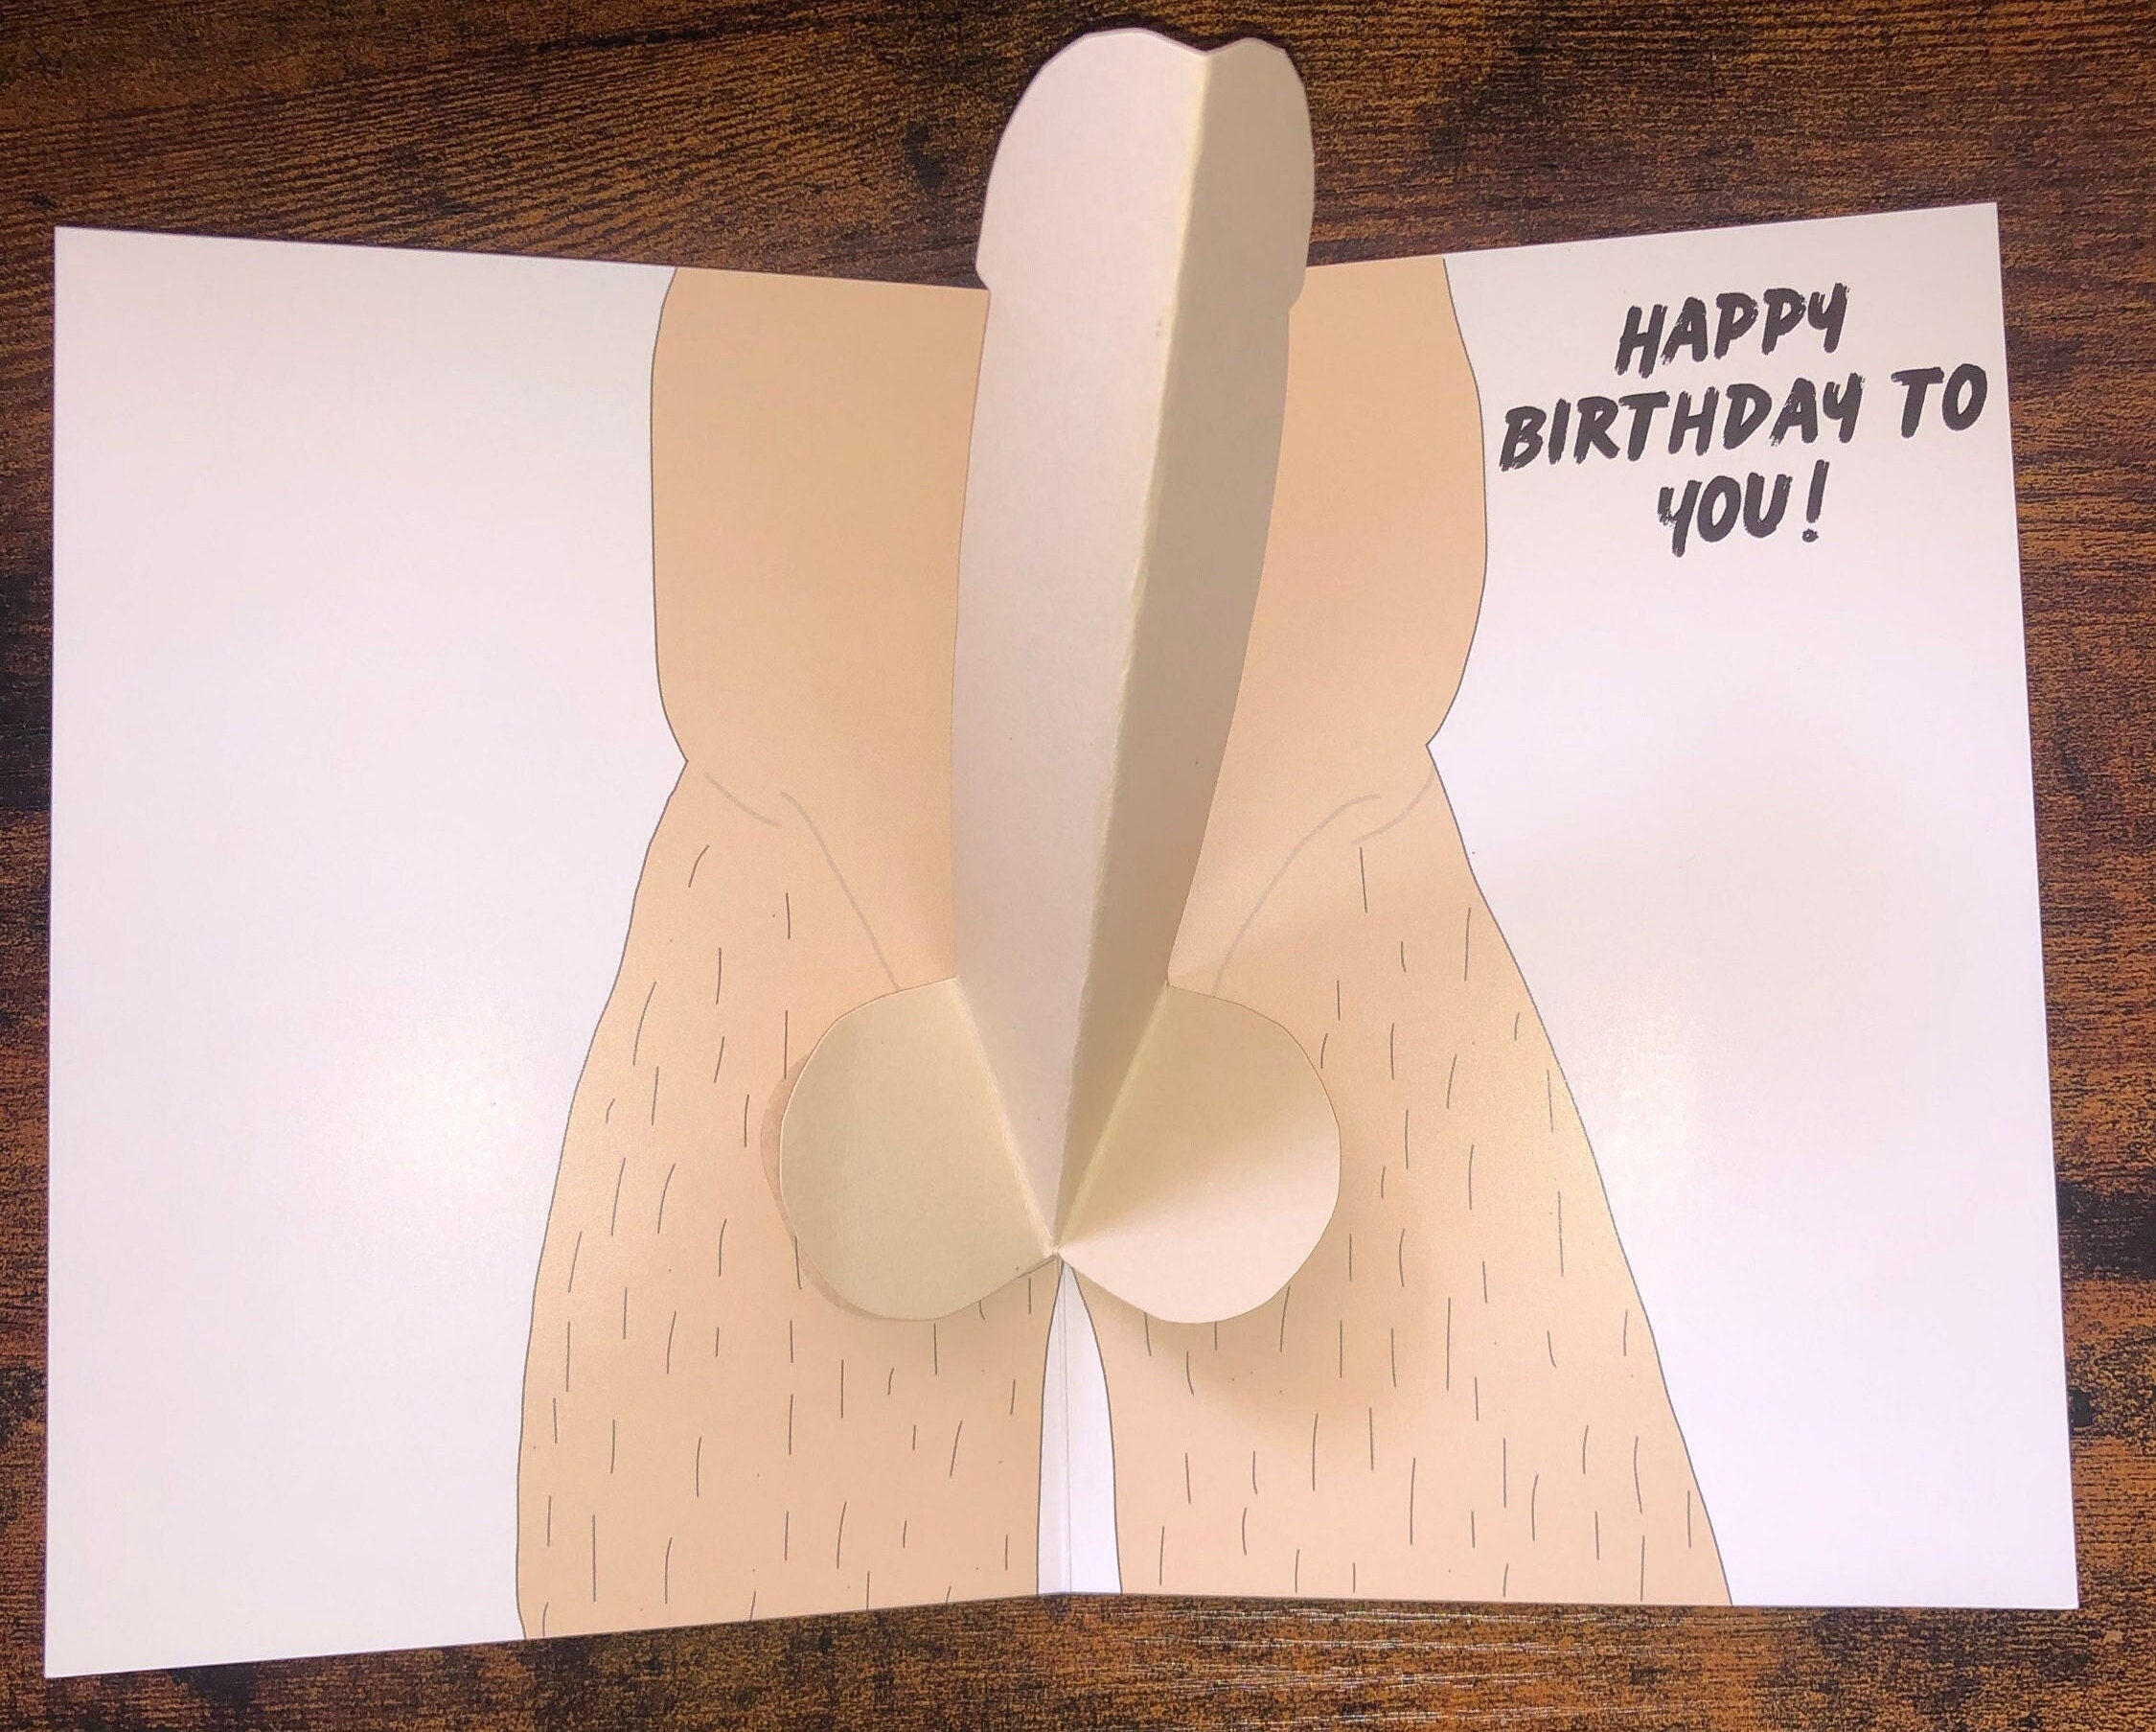 You're The Tits - Pop Up Boob Card - Dicks By Mail - Anonymously mail a bag  of dicks